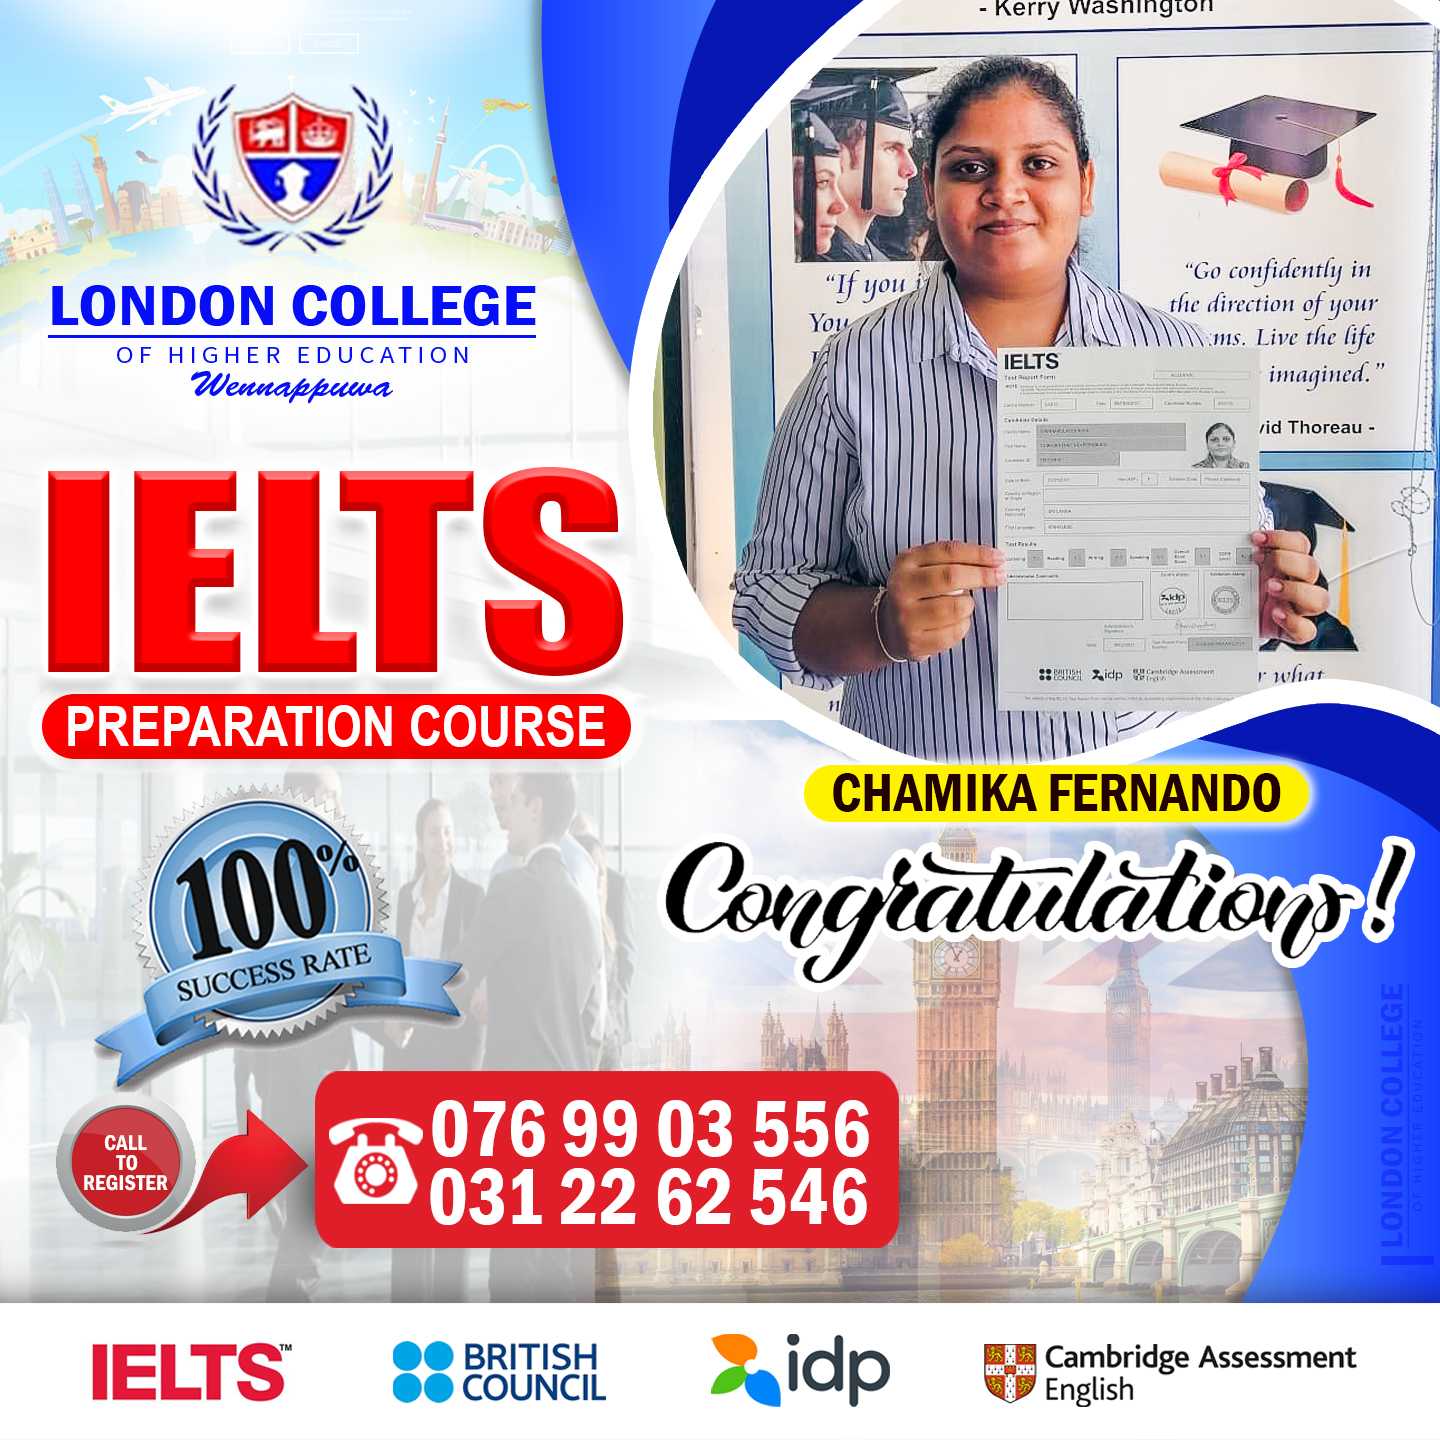 London College Of Higher Education,gallery,ielts